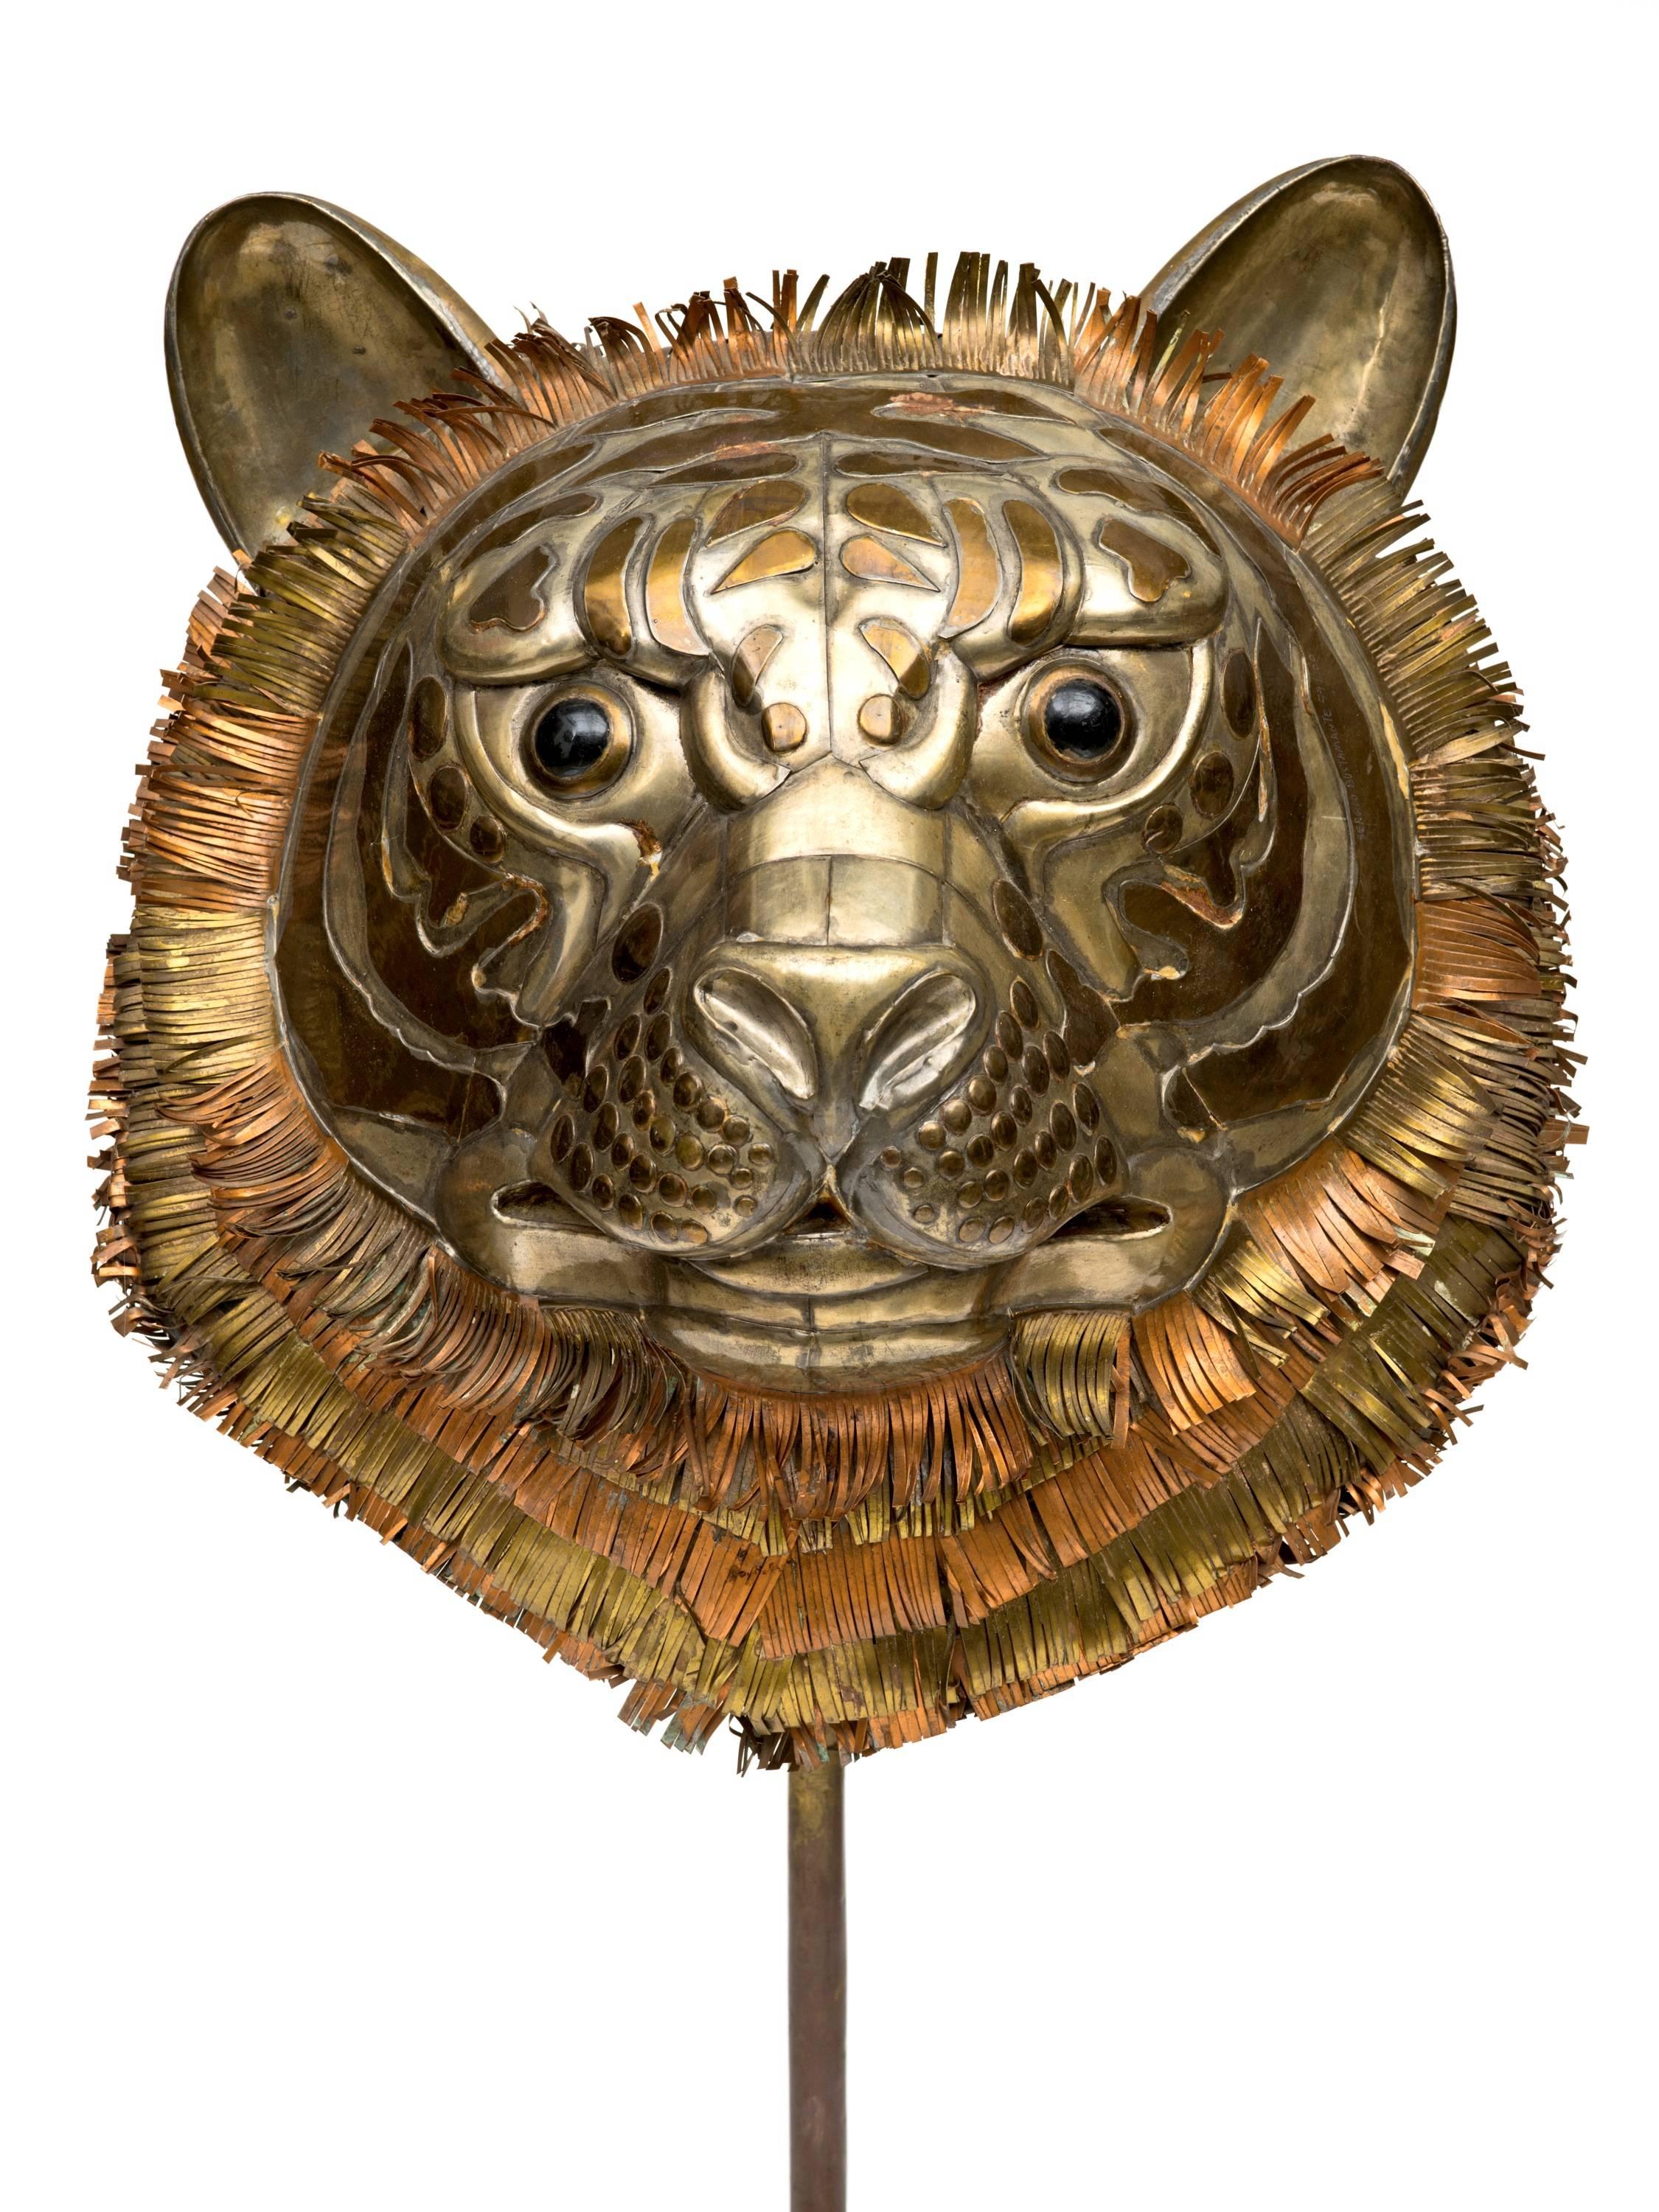 From the 1960s comes this great tiger sculpture by Sergio Bustamante of mixed metals on a copper base. Great scale and design makes this an unusual and dynamic Bustamante find! Signed. 